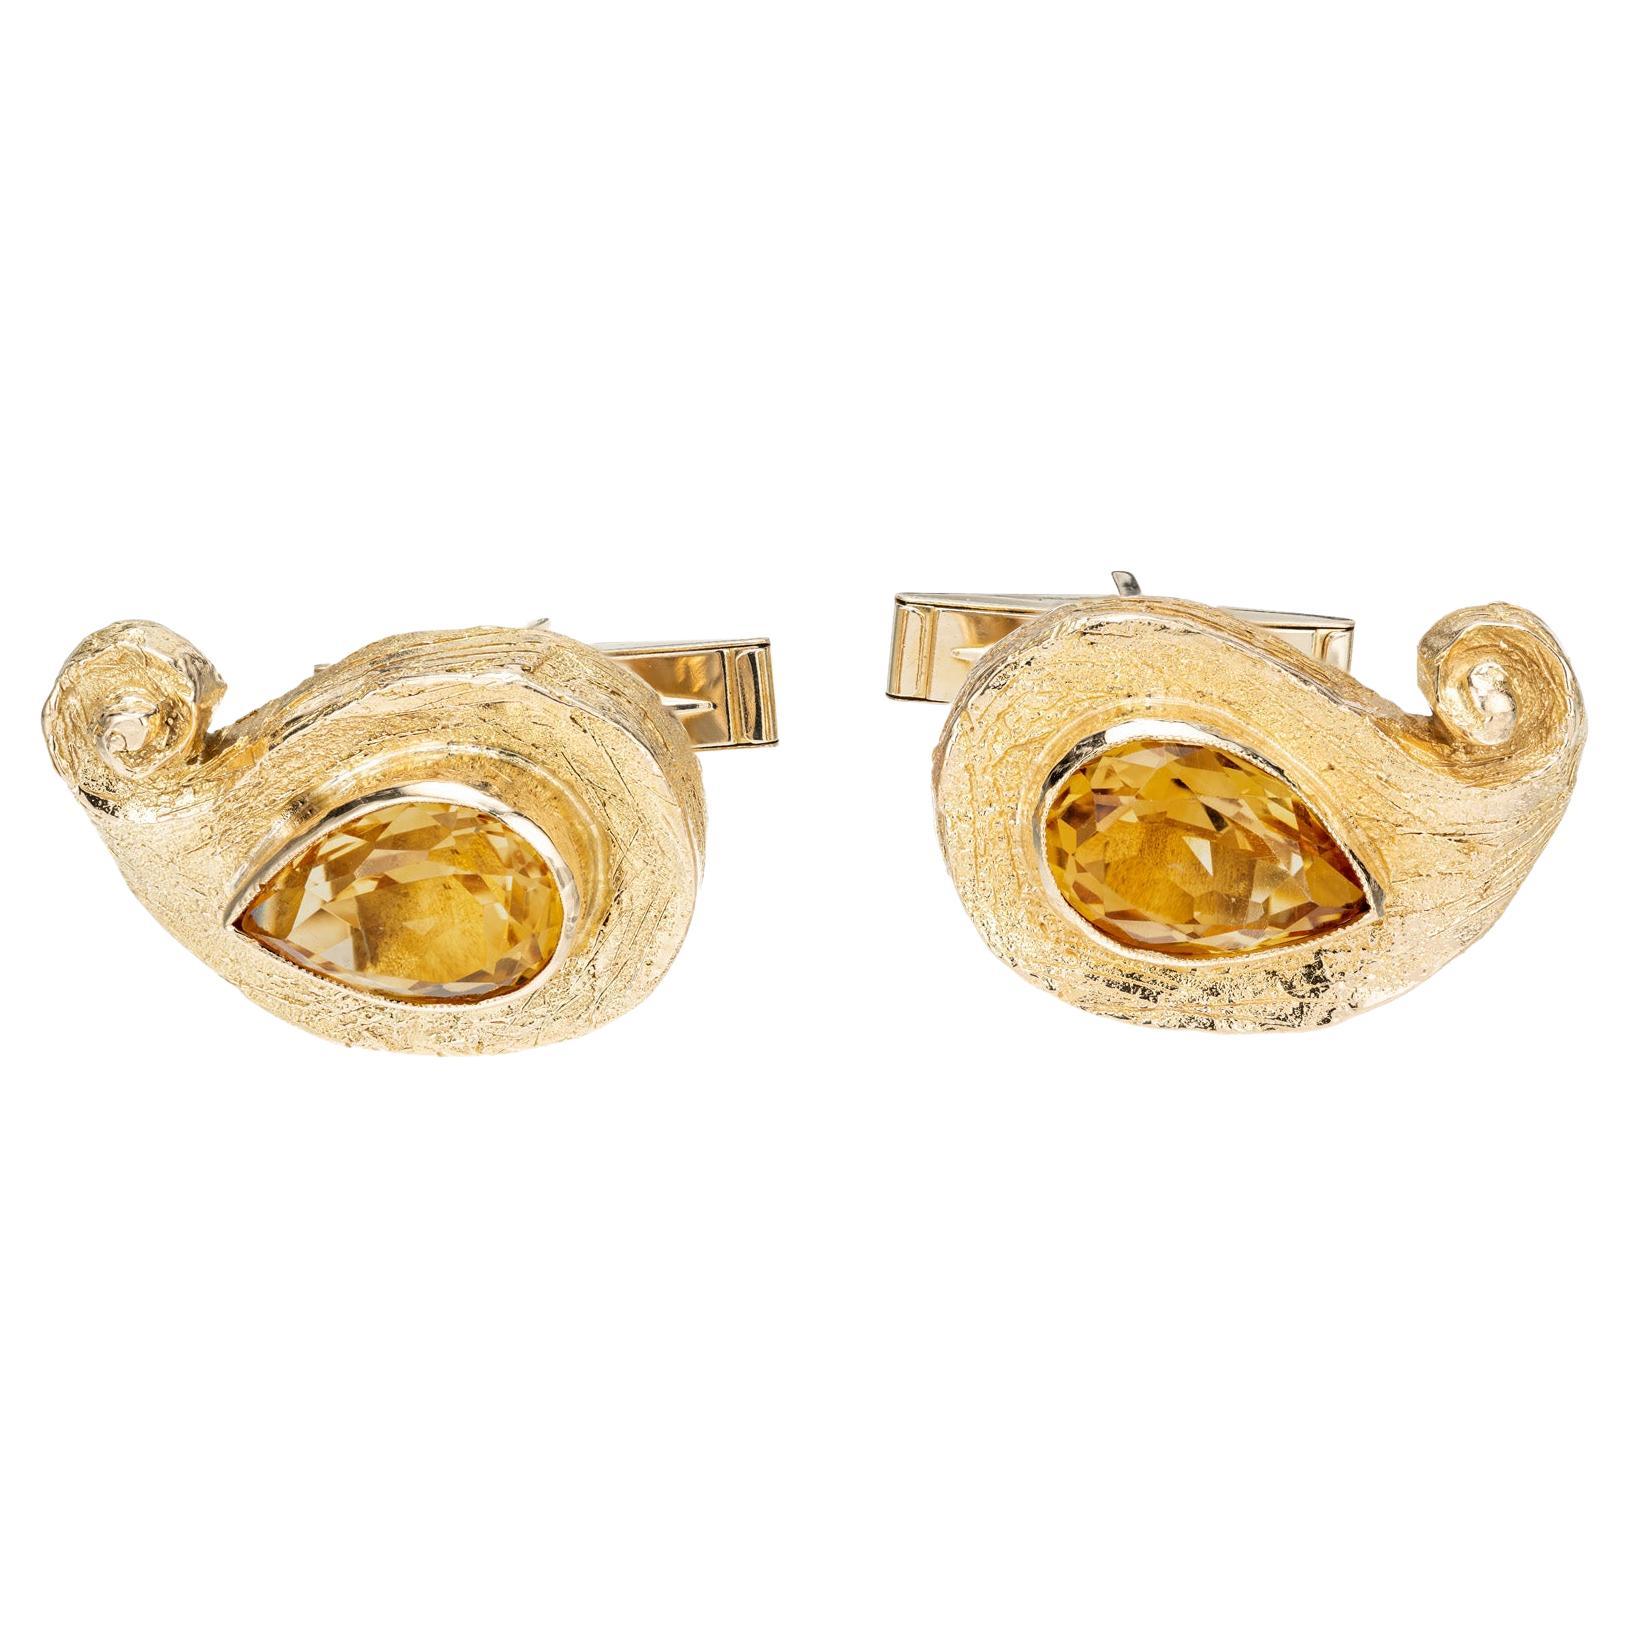 1960's Citrine men's cufflinks. 2 pear shaped citrines totaling 6.00cts. Set in 18k textured yellow gold. 

2 Pear shaped citrine. 6.00cts  12.1x8.8 mm
Top to bottom: 23.7mm or .93 inches
Width: 15.8mm or .62 inches
Depth or thickness: 7.0mm
Weight: